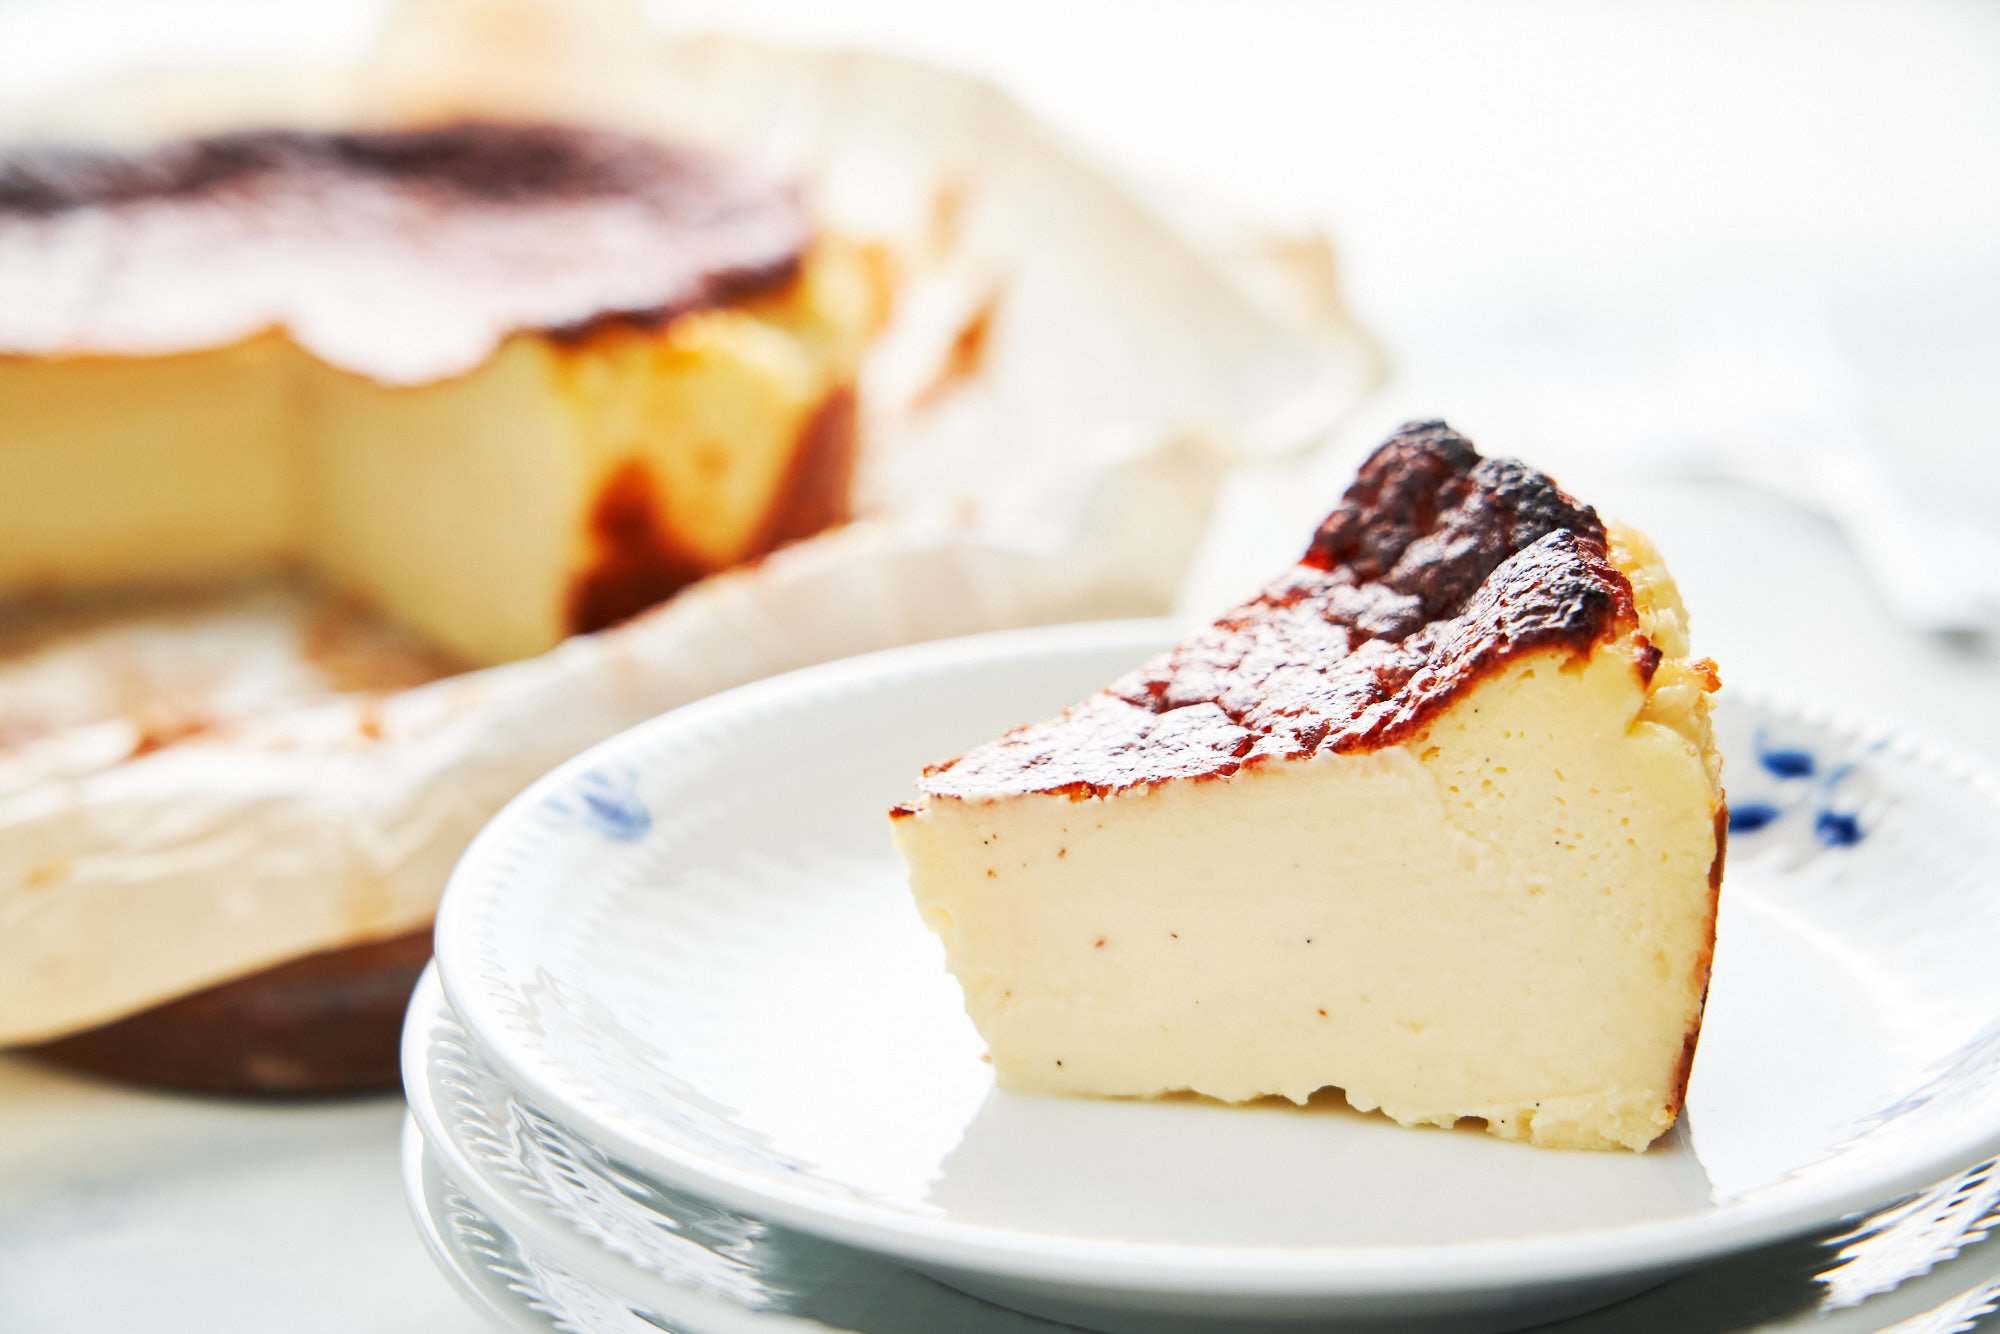 Custardy smooth in the center with a caramelized top, this Burnt Basque Cheesecake comes together from just a few basic ingredients in the blender.